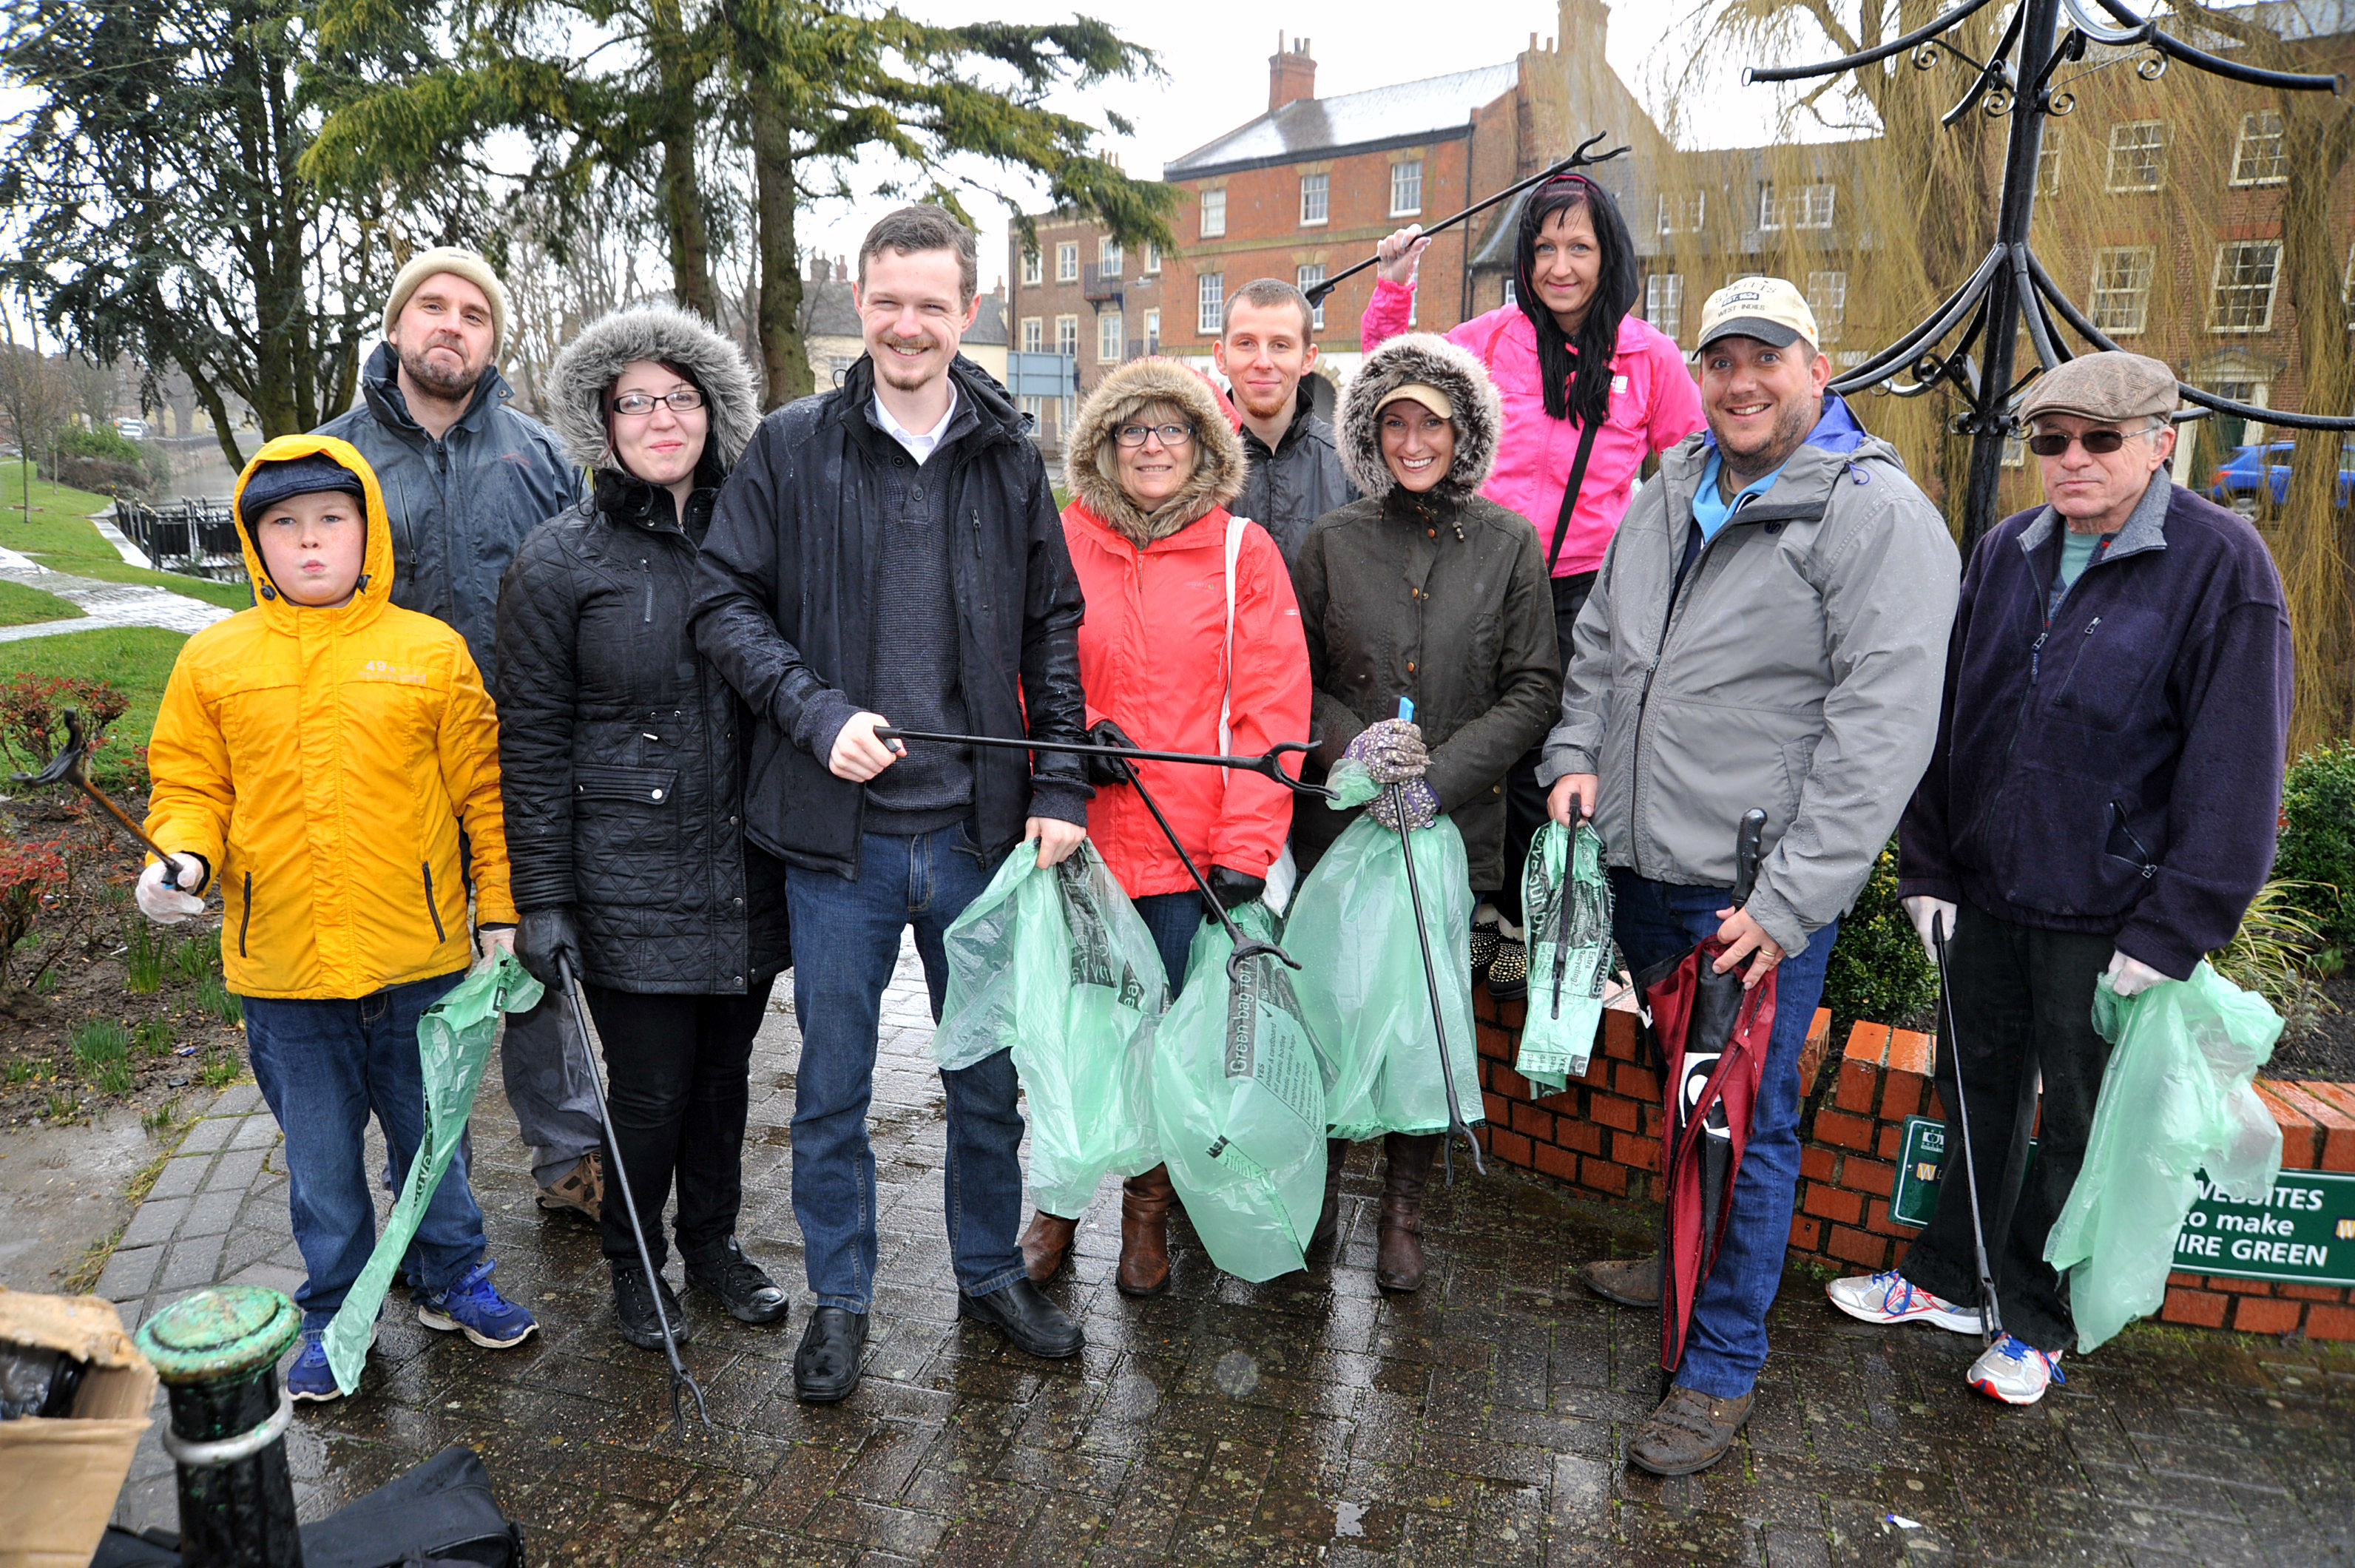 clean-for-the-queen-litter-pick-jack-mcleans-group-along-riverside-2